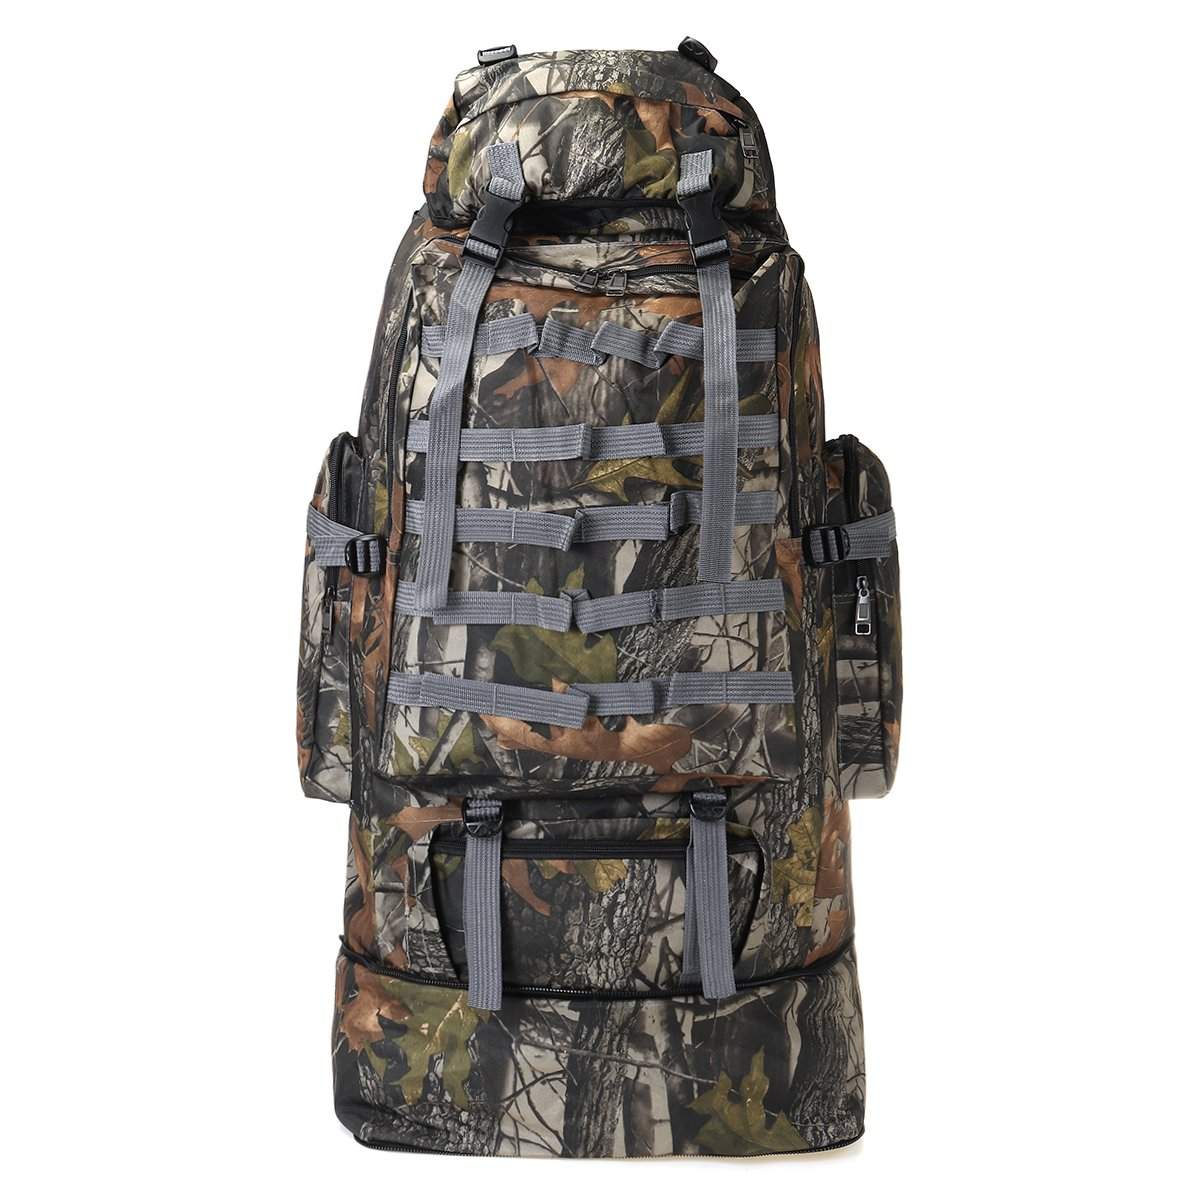  Military Matter 70L Military Tactical Waterproof Backpack | The Best CS Tactical Clothing Store